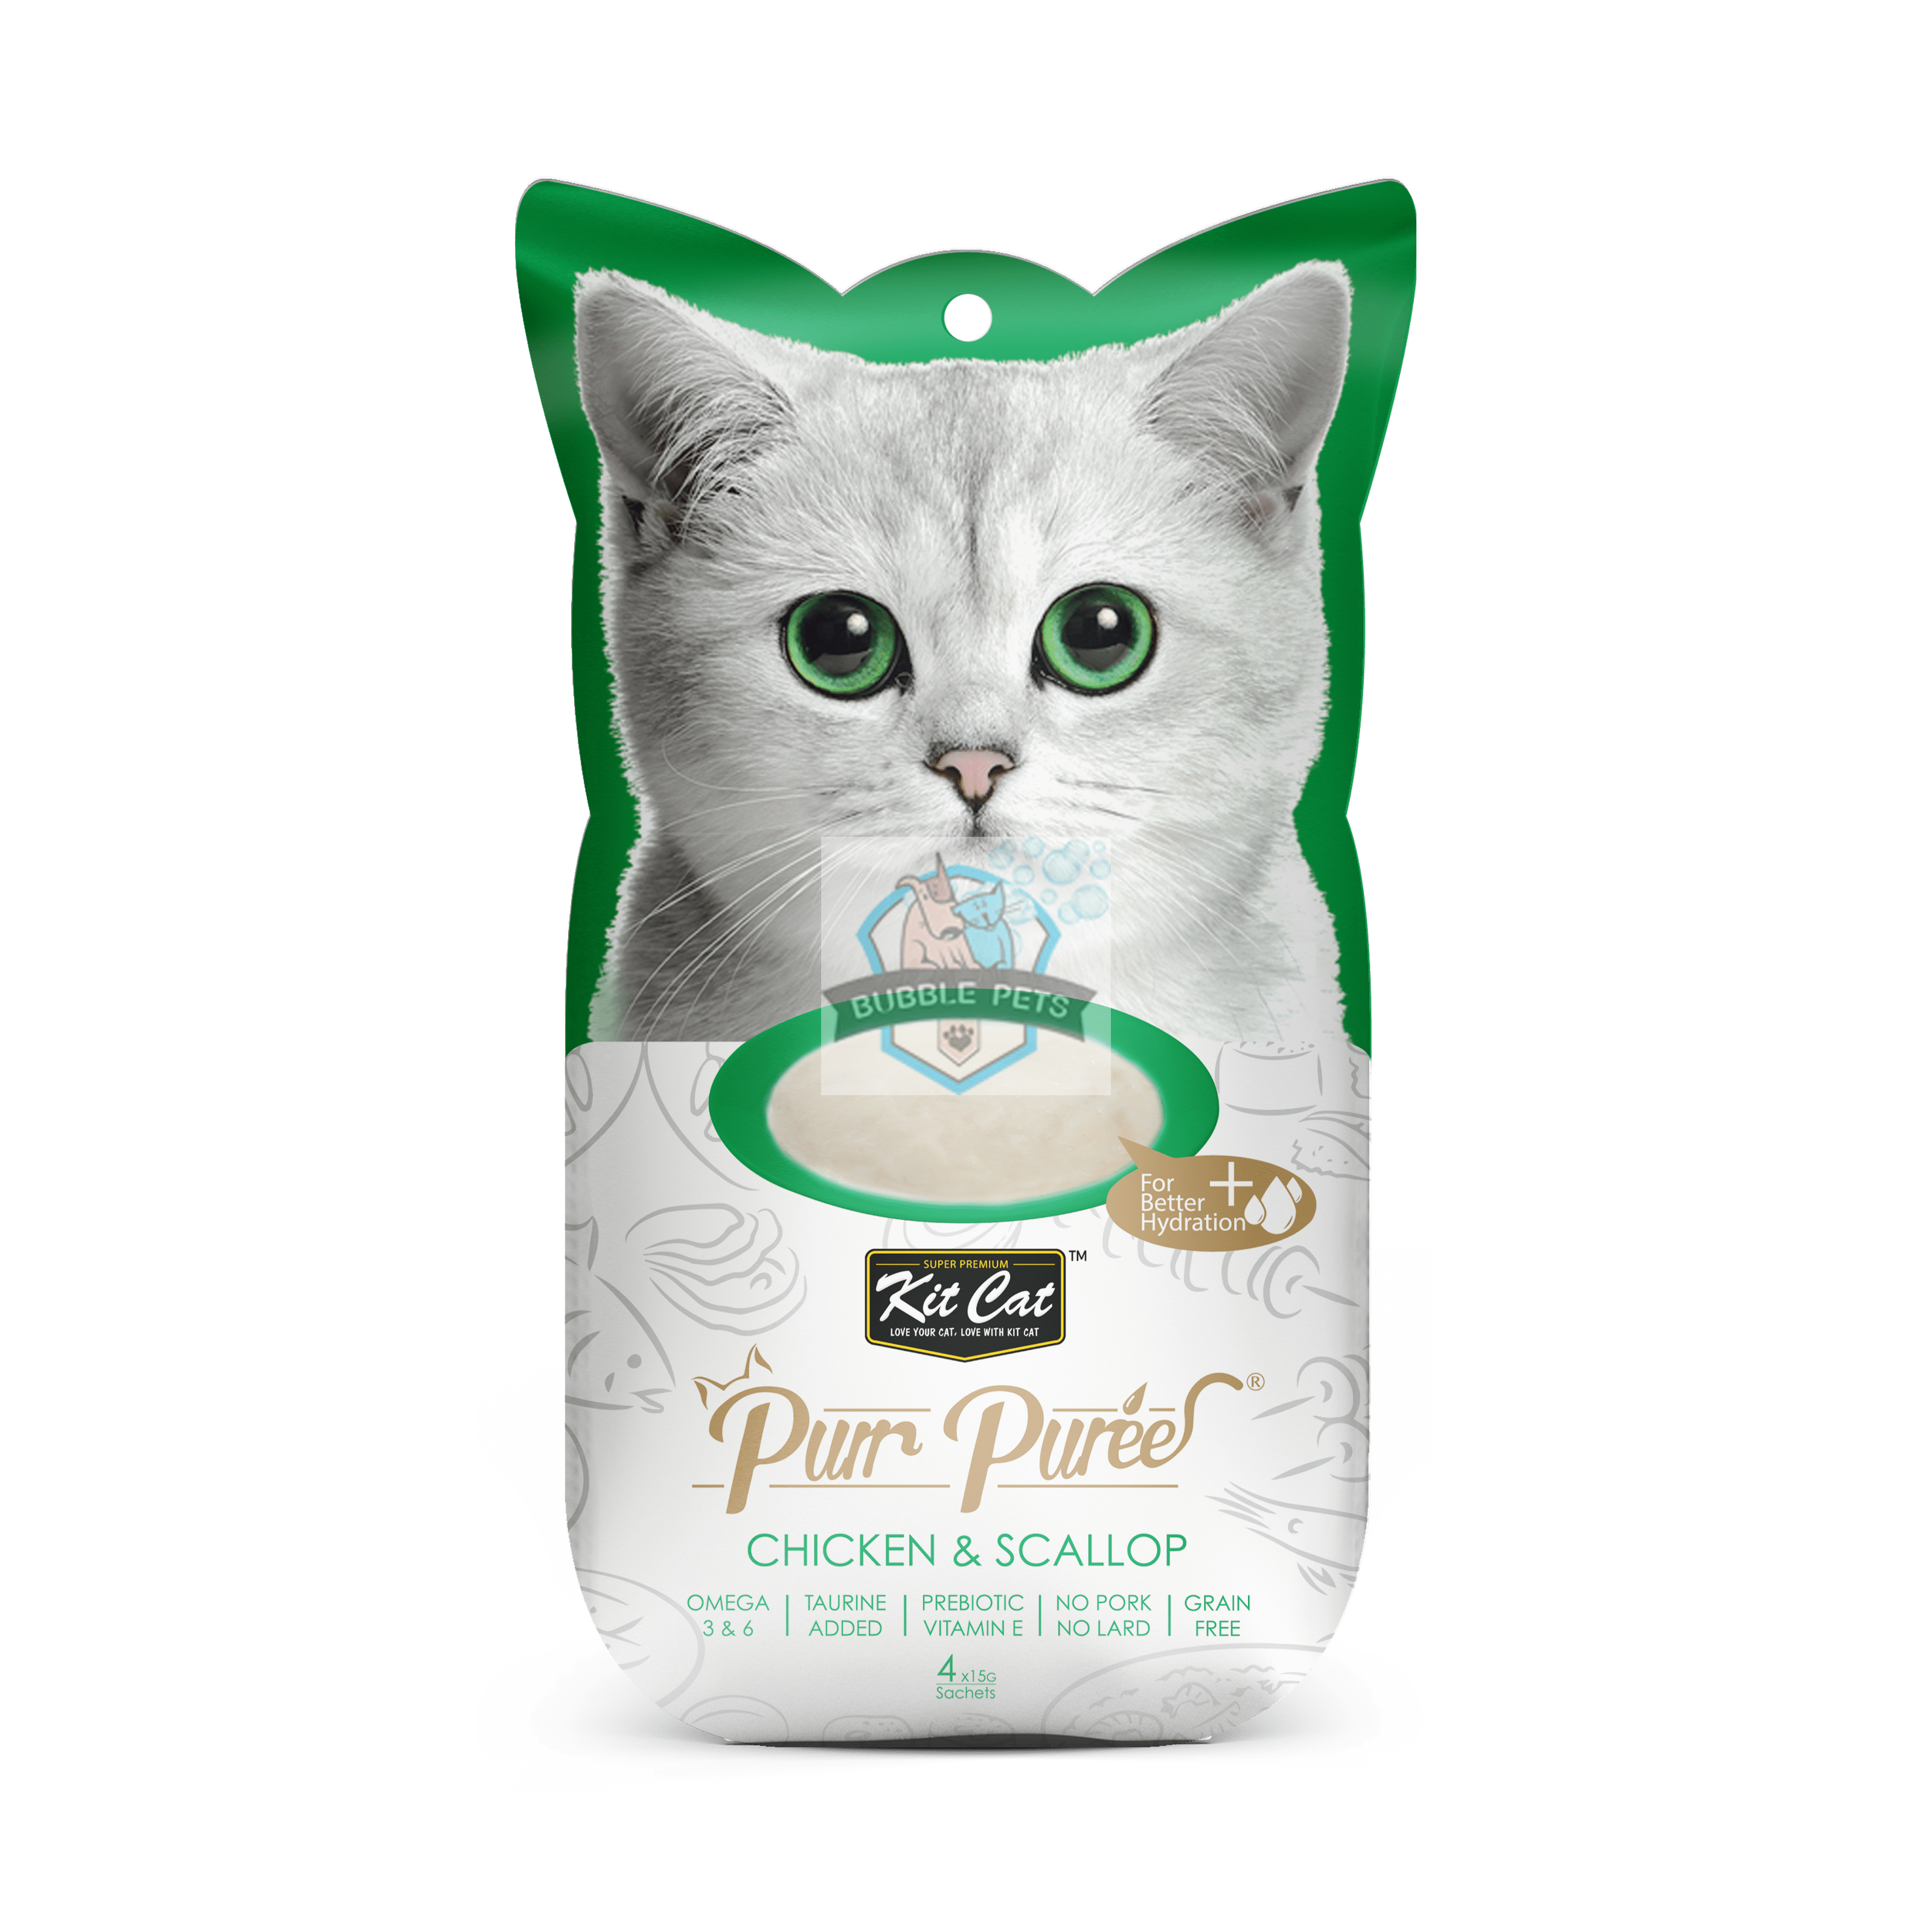 Kit Cat Pure Puree Chicken And Scallop Cat Food